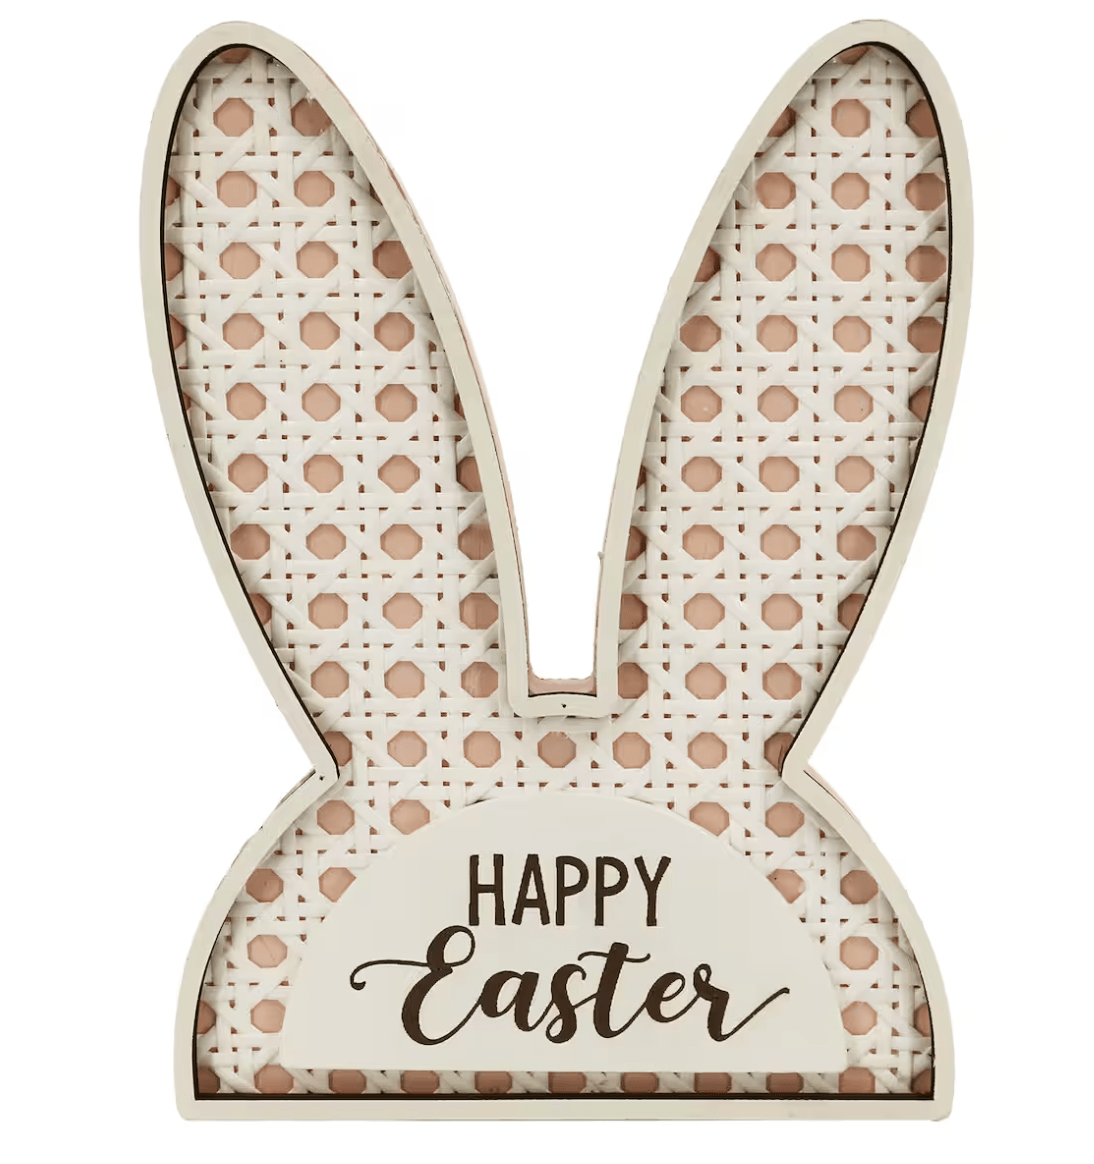 bunny ears table top sign with wicker backdrop